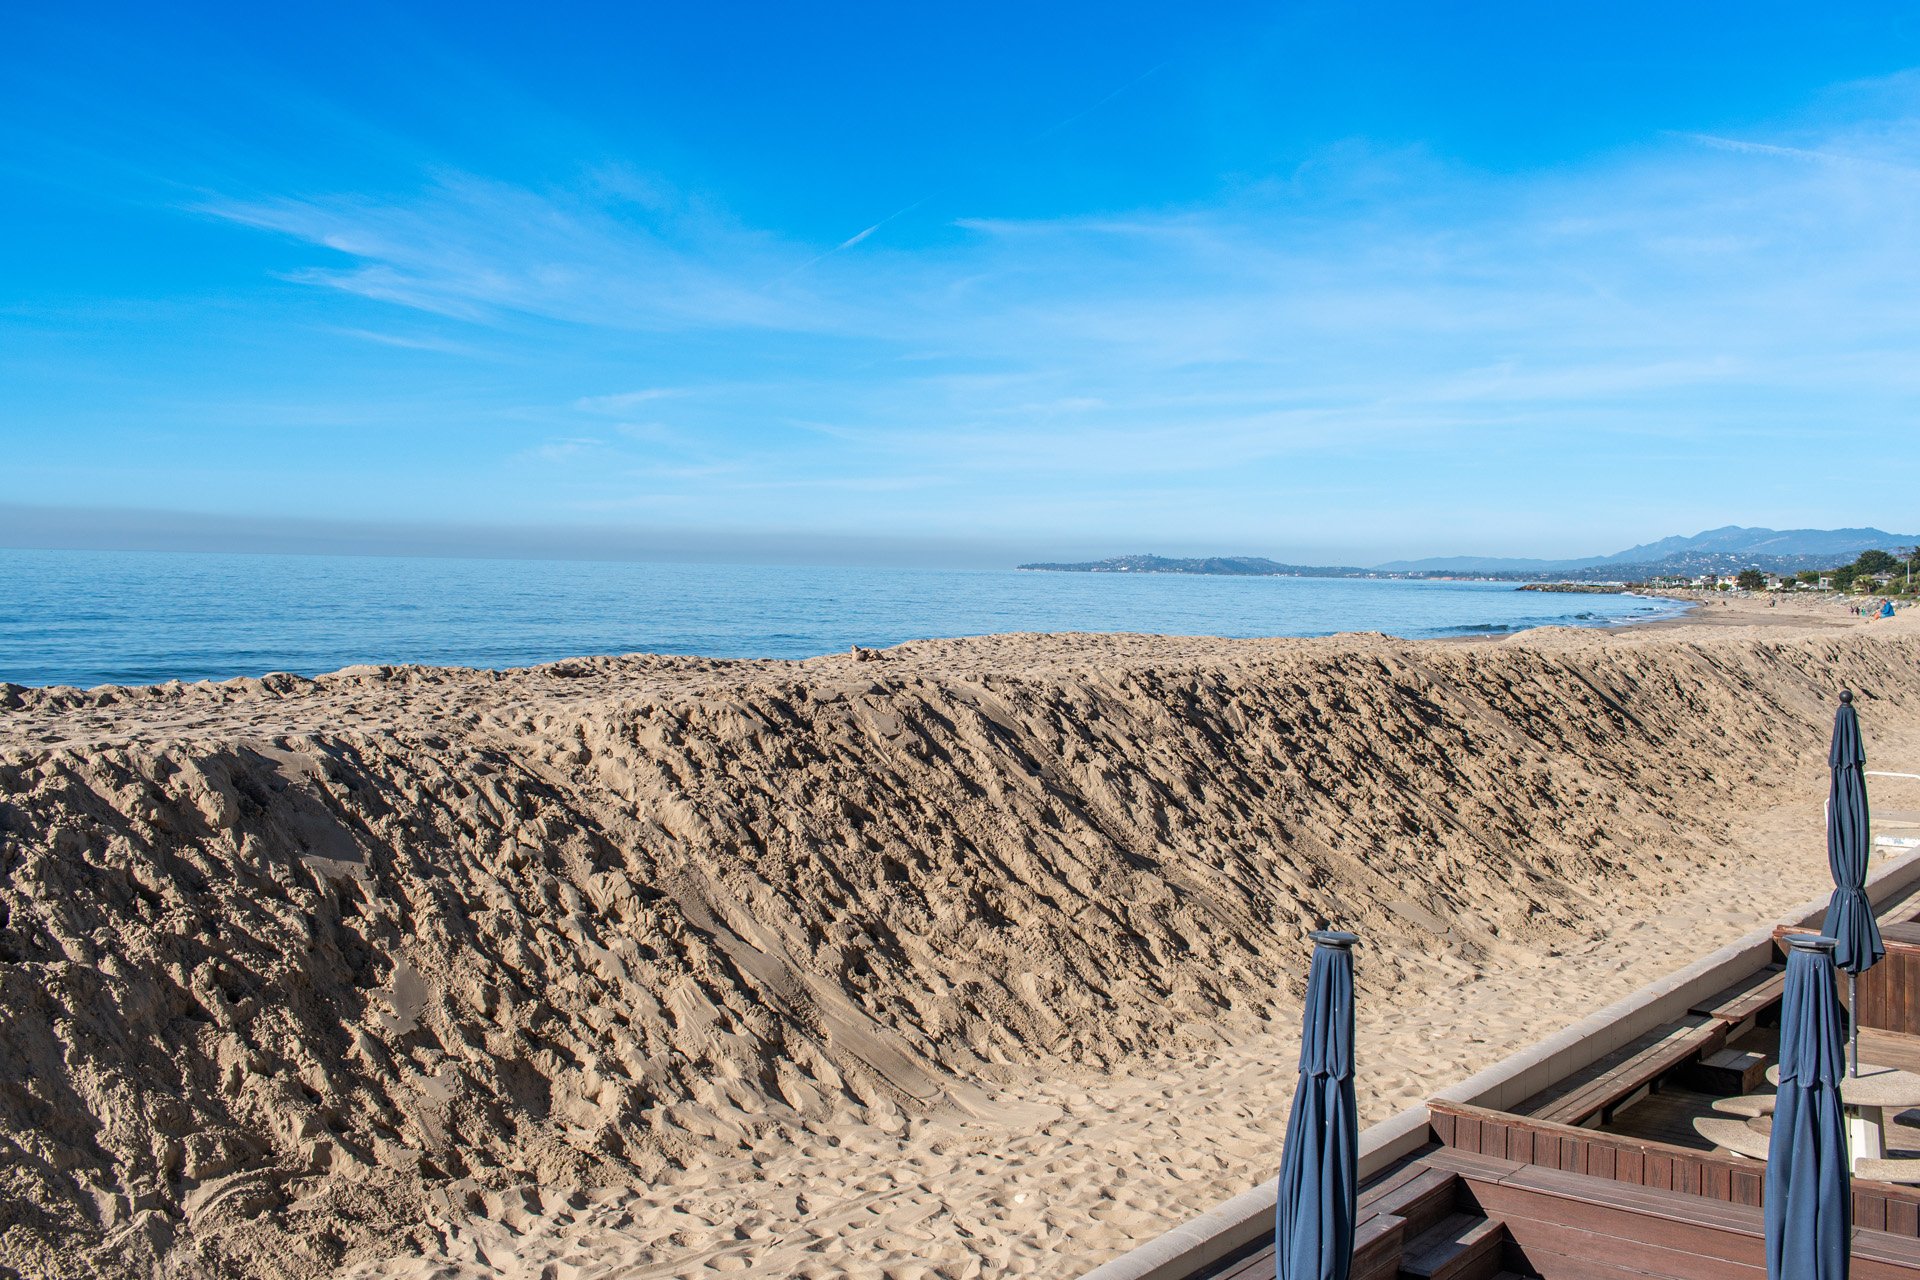 Another view of the beach and ocean from the balcony with the winter berm in place.